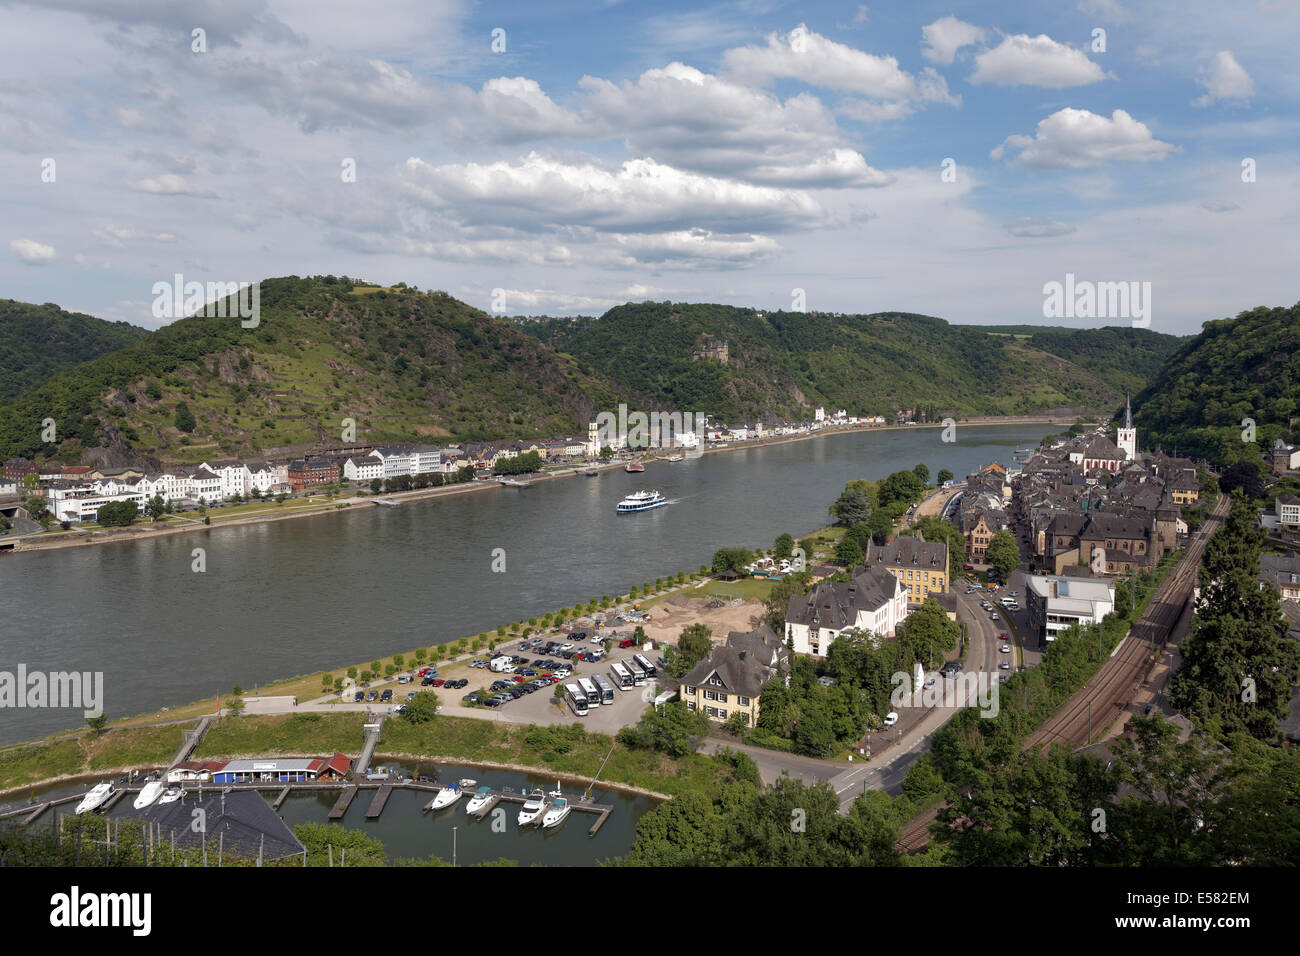 Rhine Valley with St. Goar and St. Goarshausen, Unesco World Heritage Upper Middle Rhine Valley, Rhineland-Palatinate, Germany Stock Photo